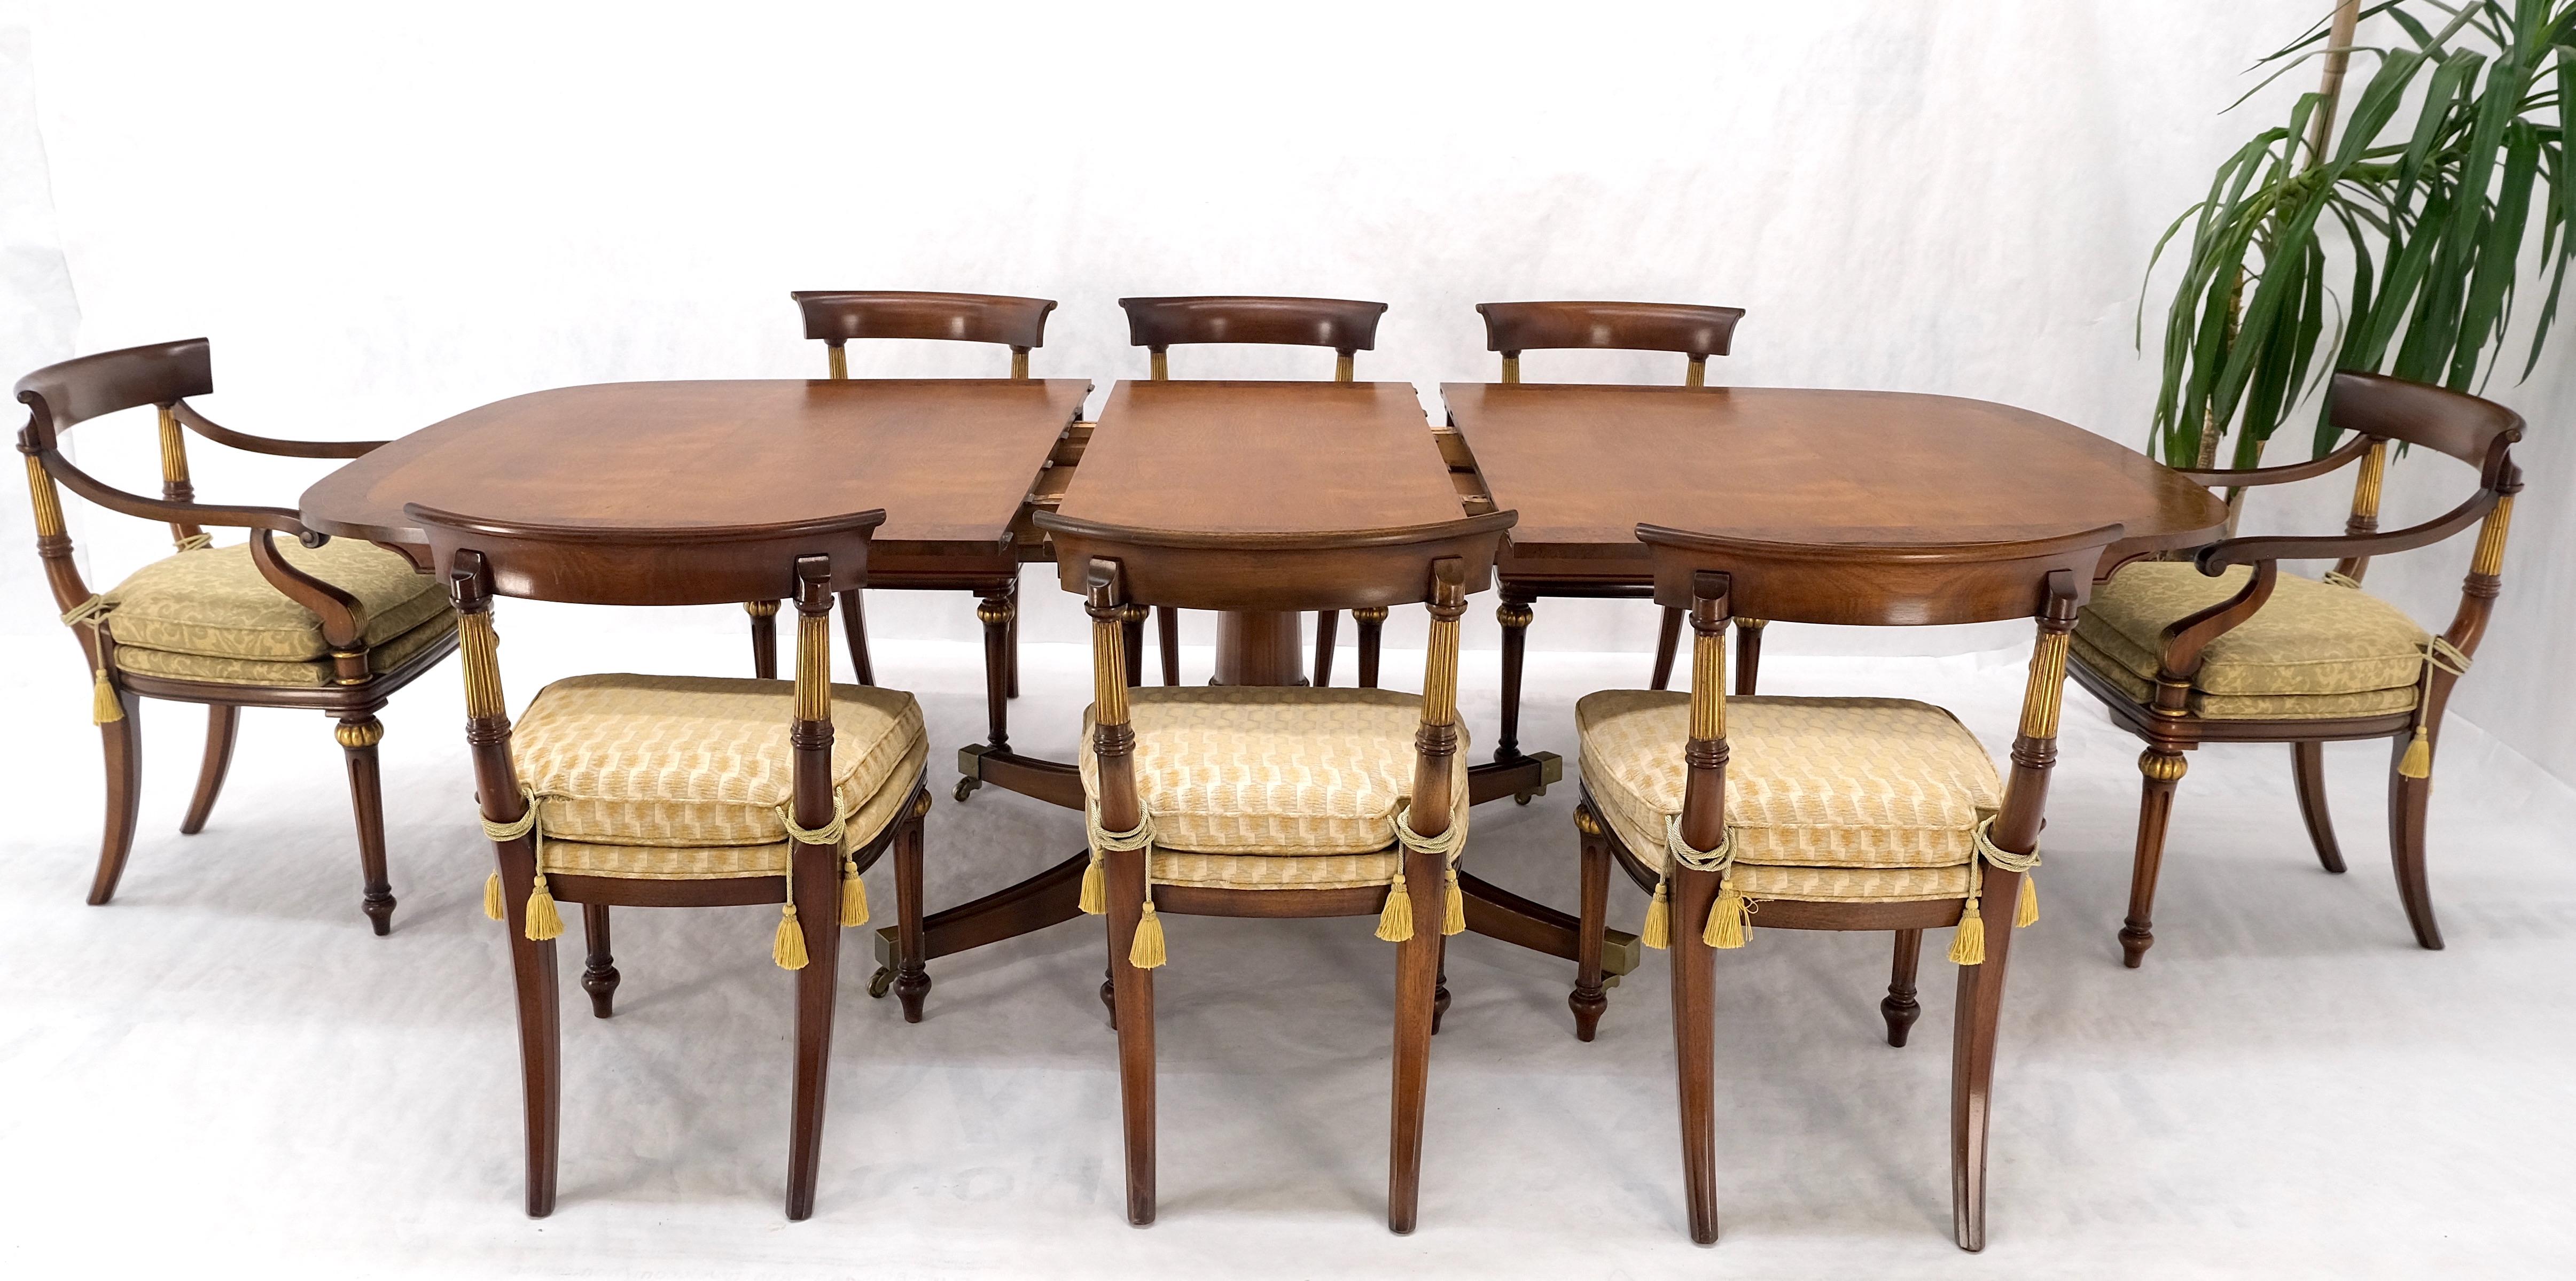 Single Pedestal One Leaf Oval Banded Dining Table 8 Regency Chairs Set MINT! For Sale 7